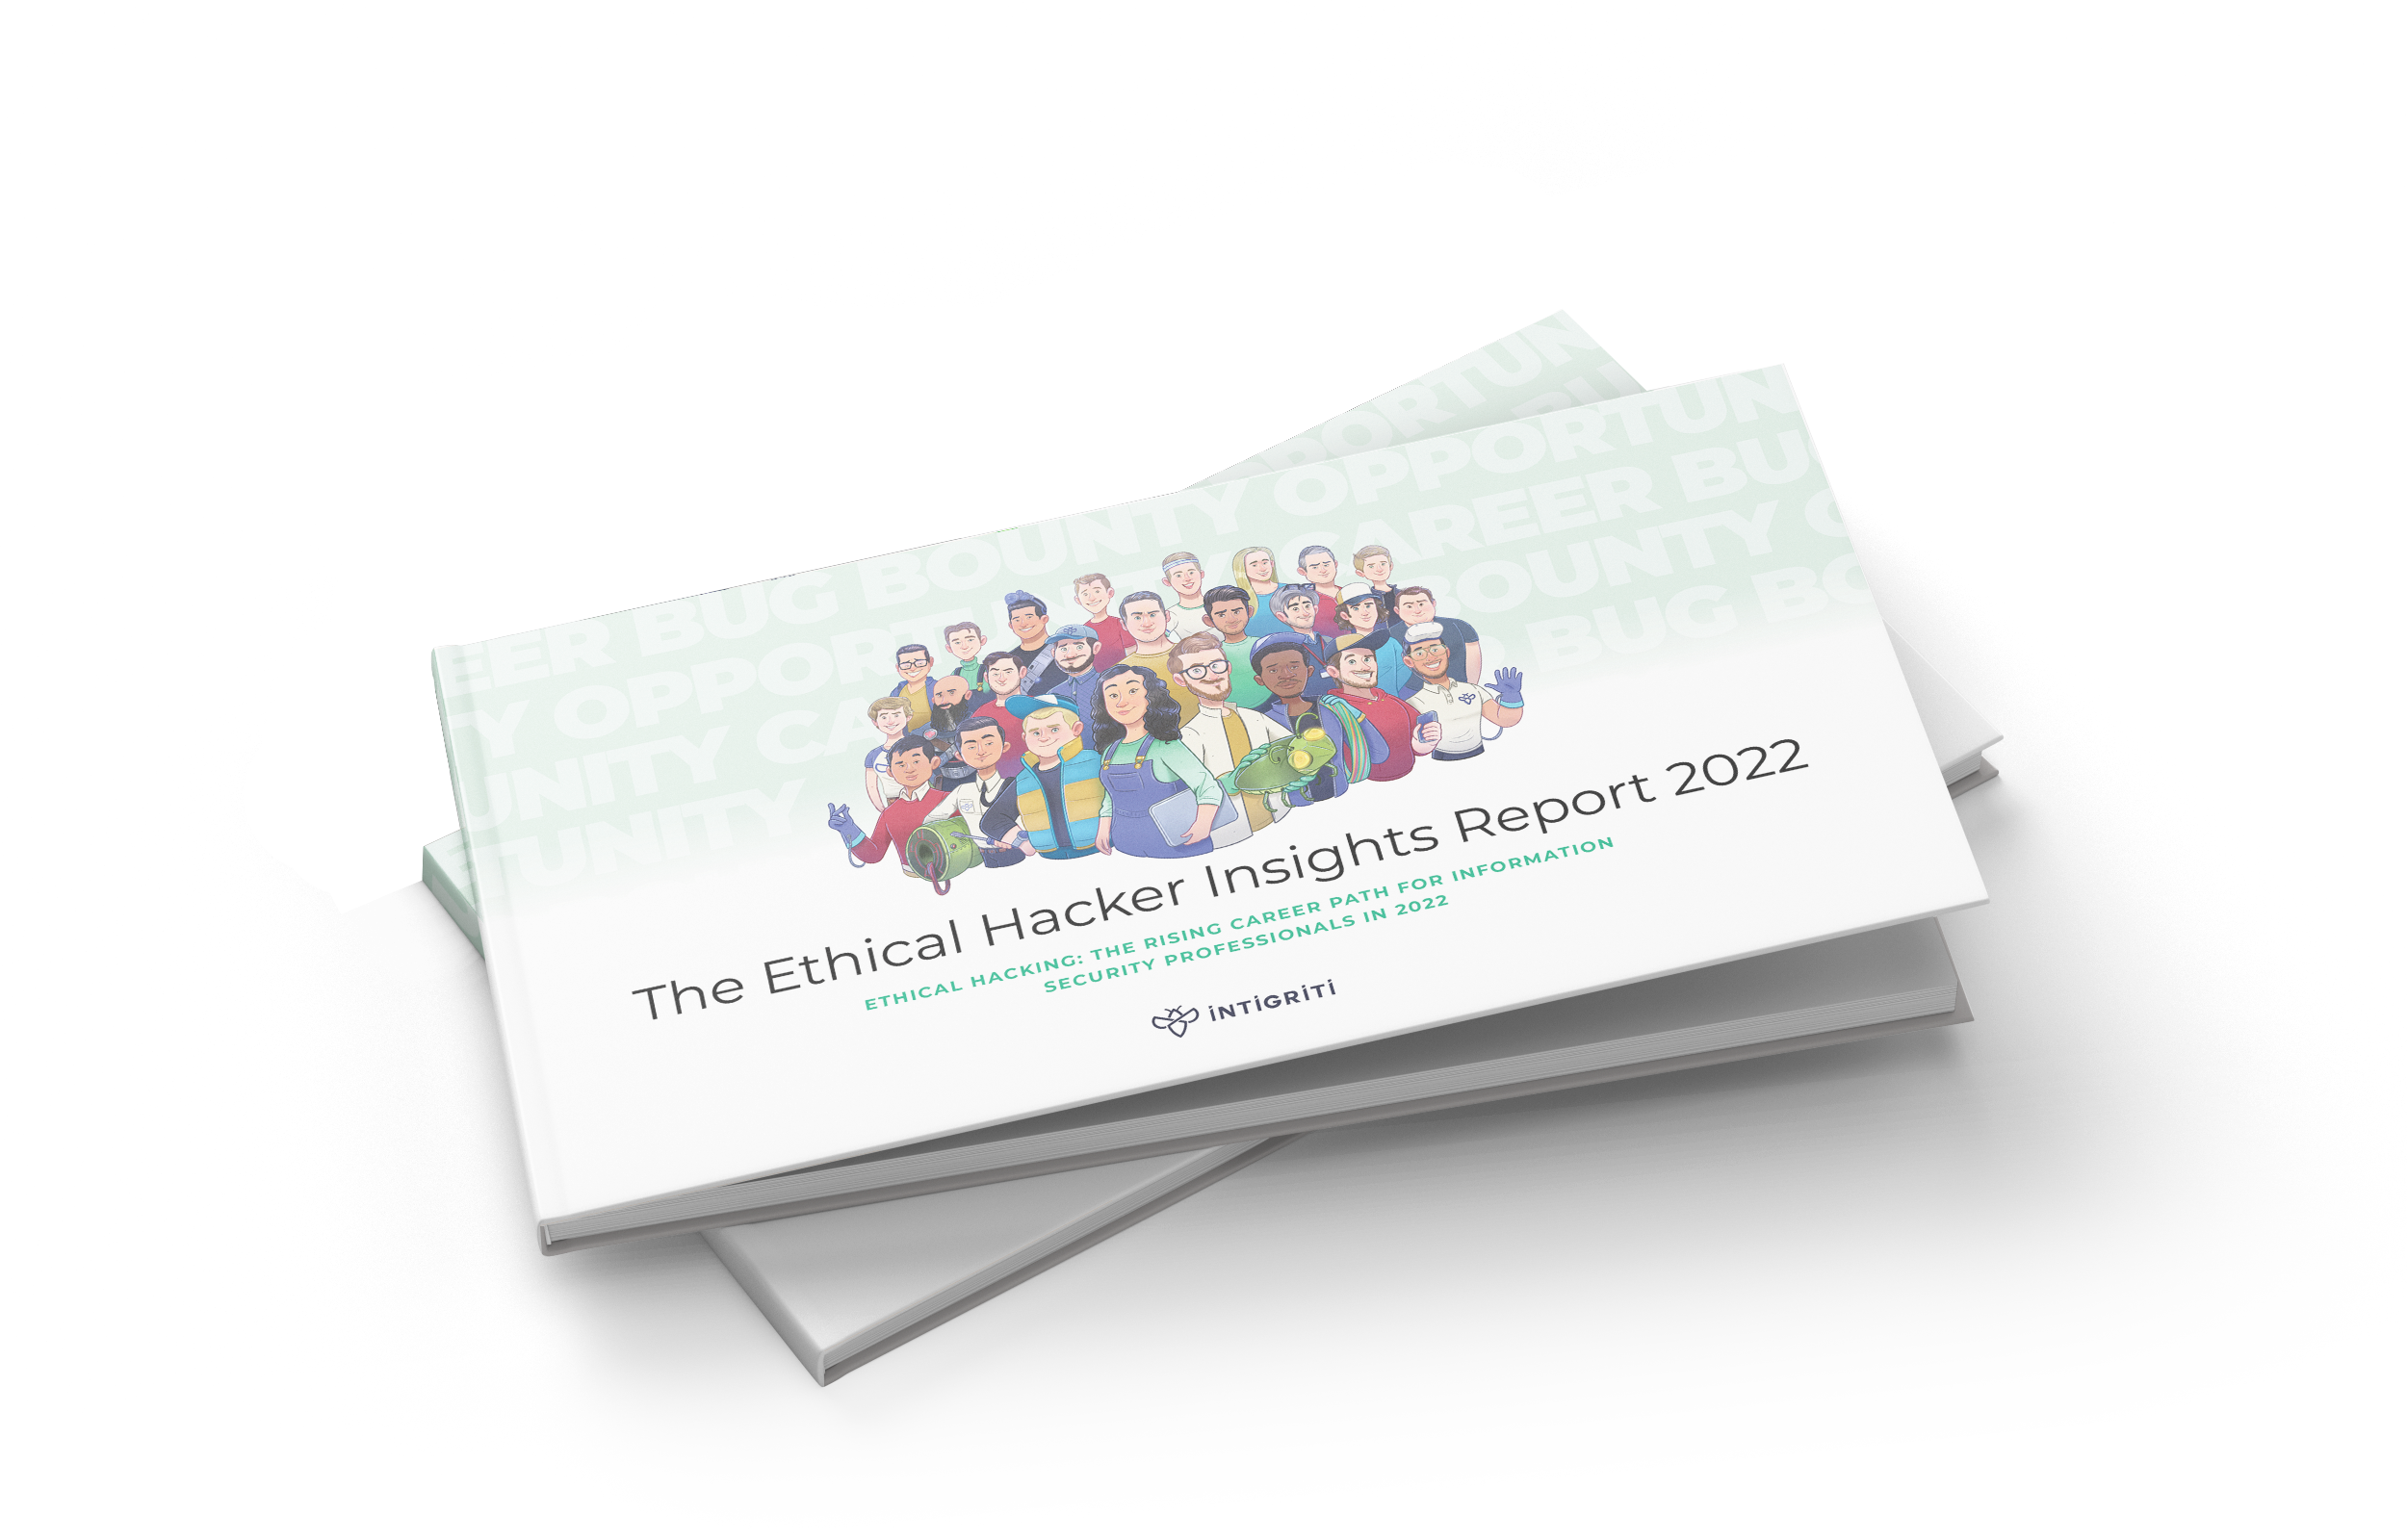 ebook_The-Ethical-Hacker-Insights-Report-2022_EN